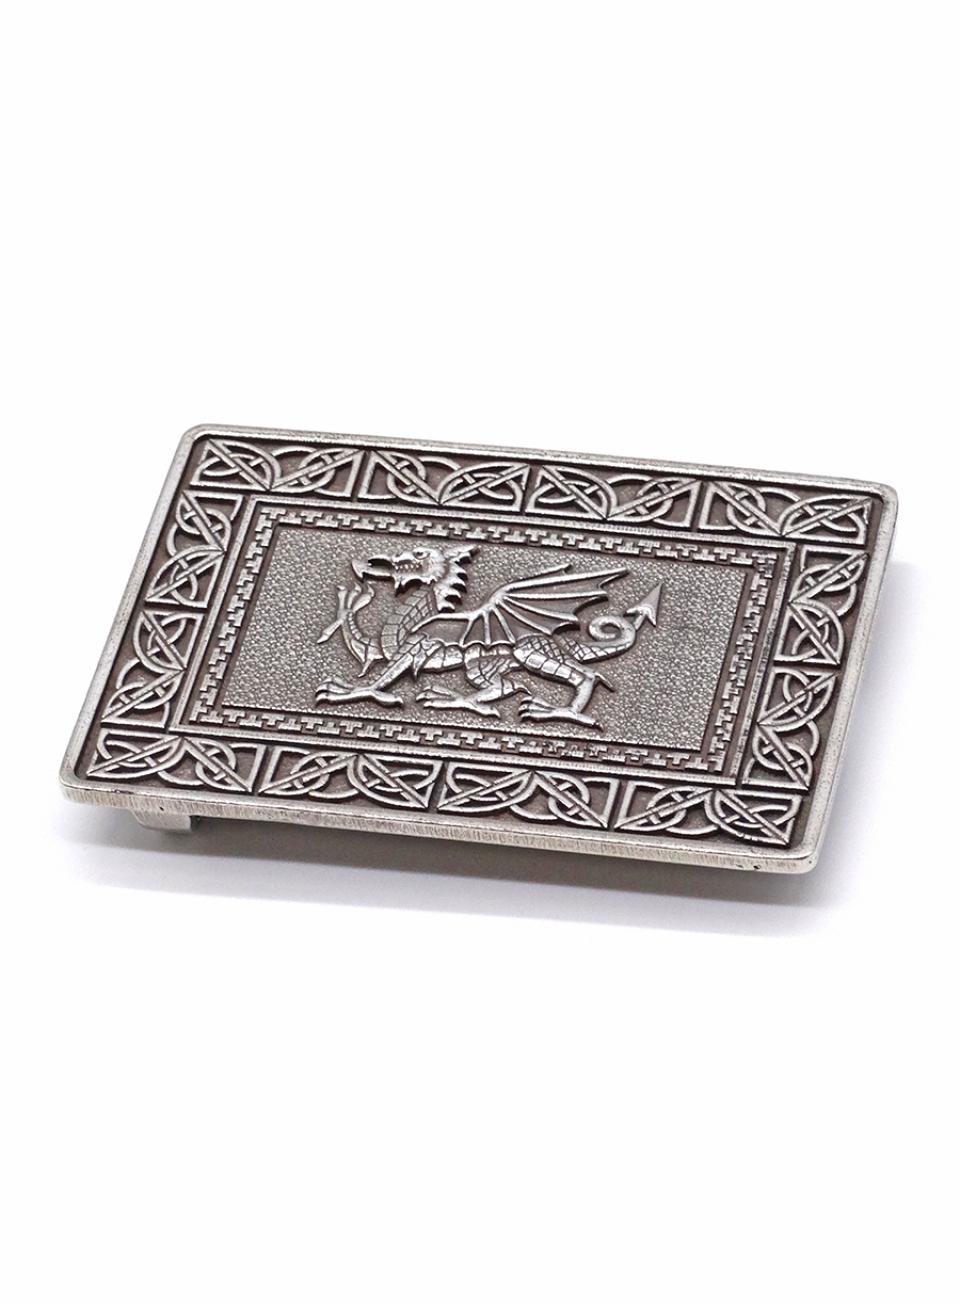 Pewter Dragon Buckle